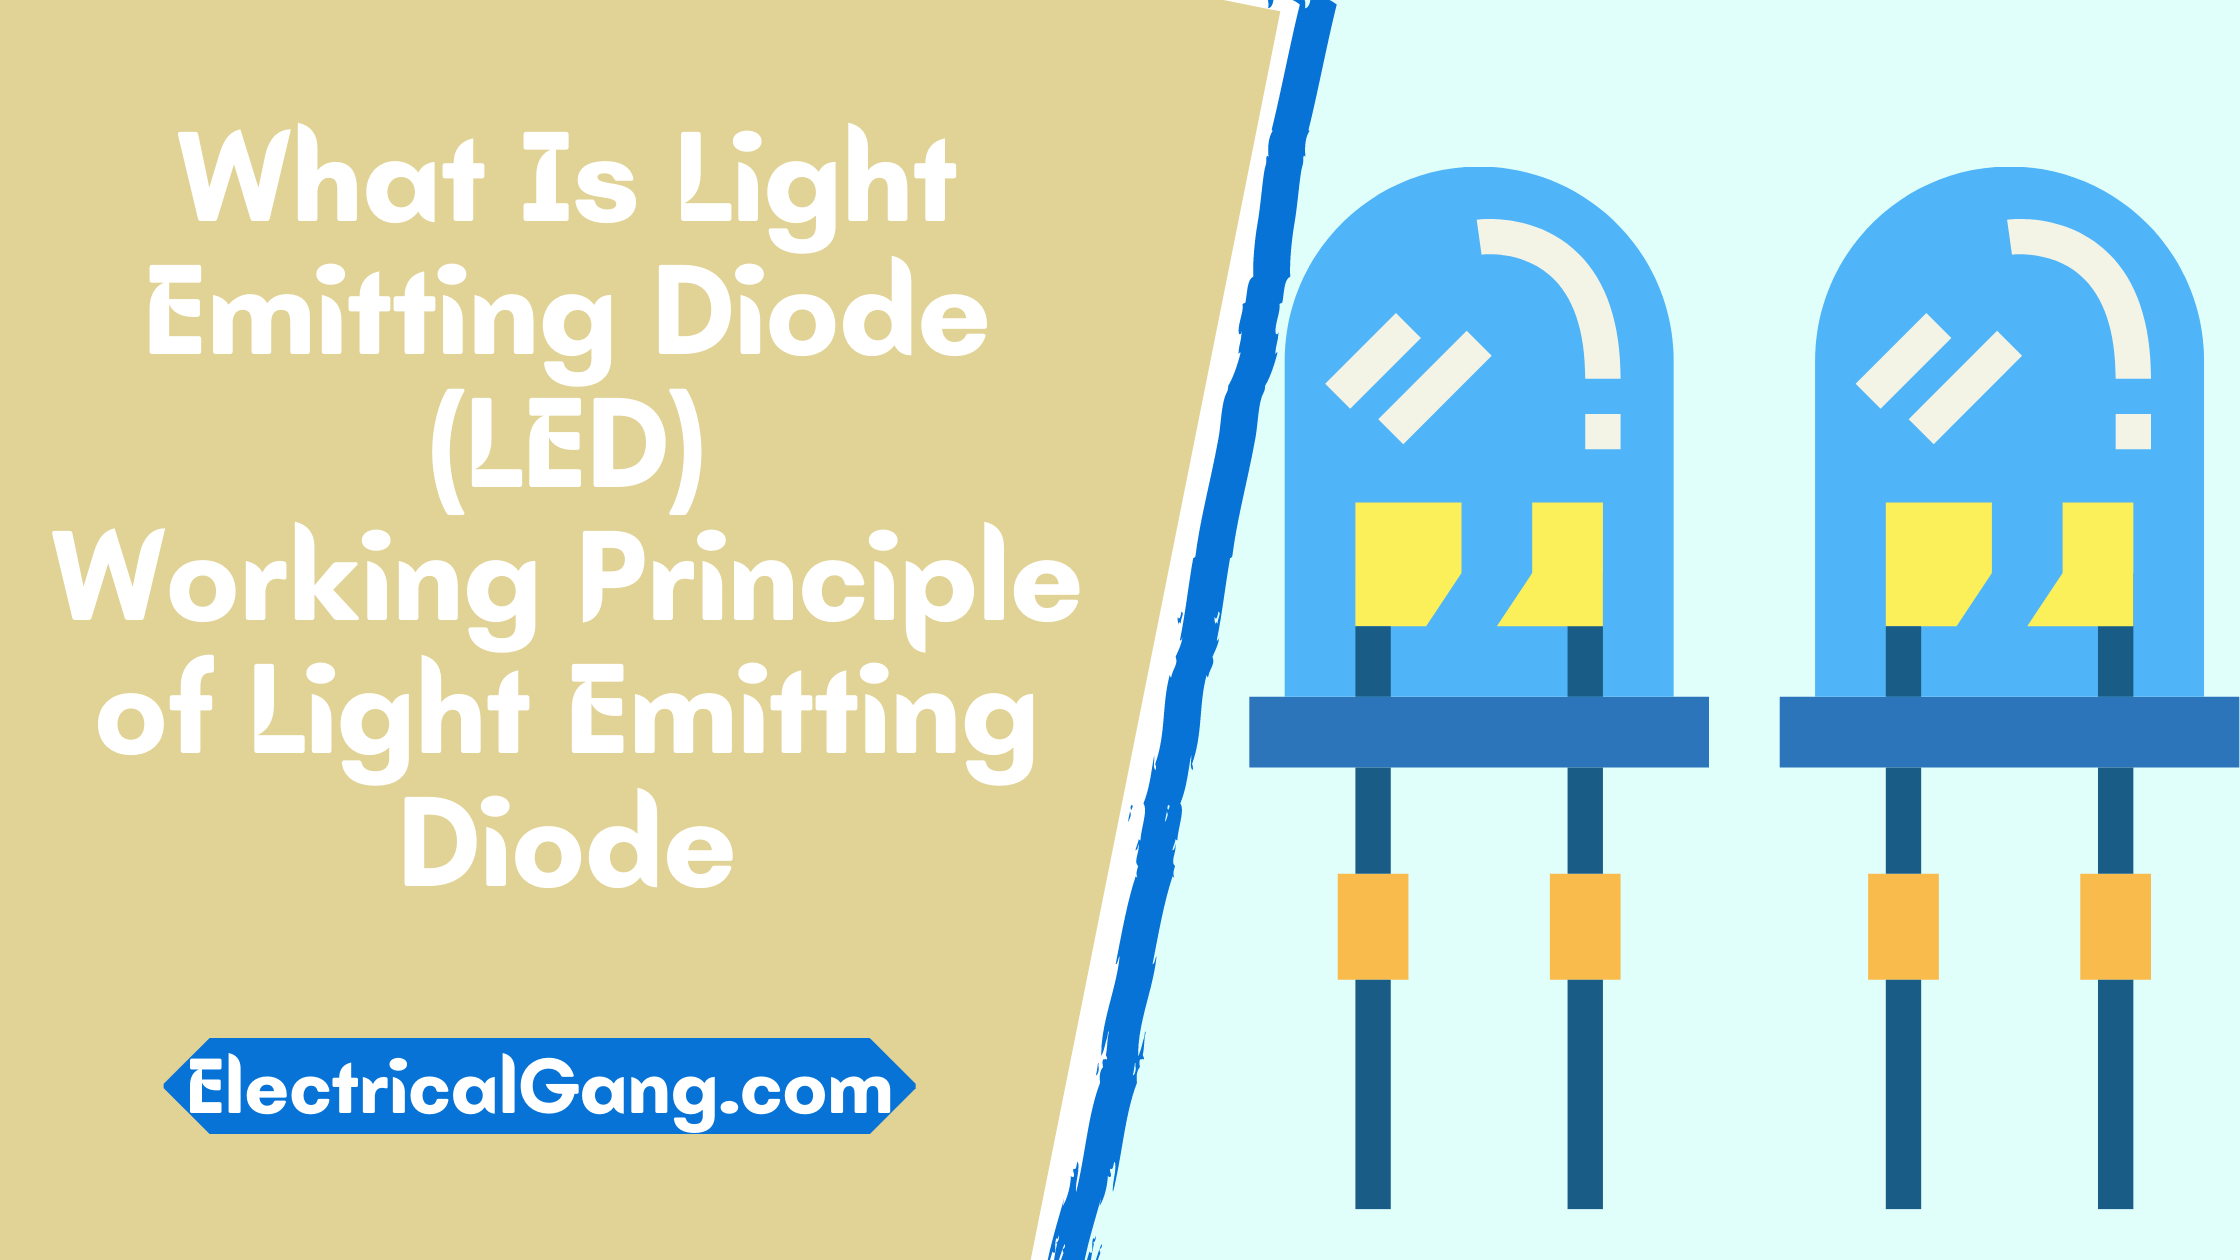 Light Emitting Diode (LED): What is it & How Does it Work